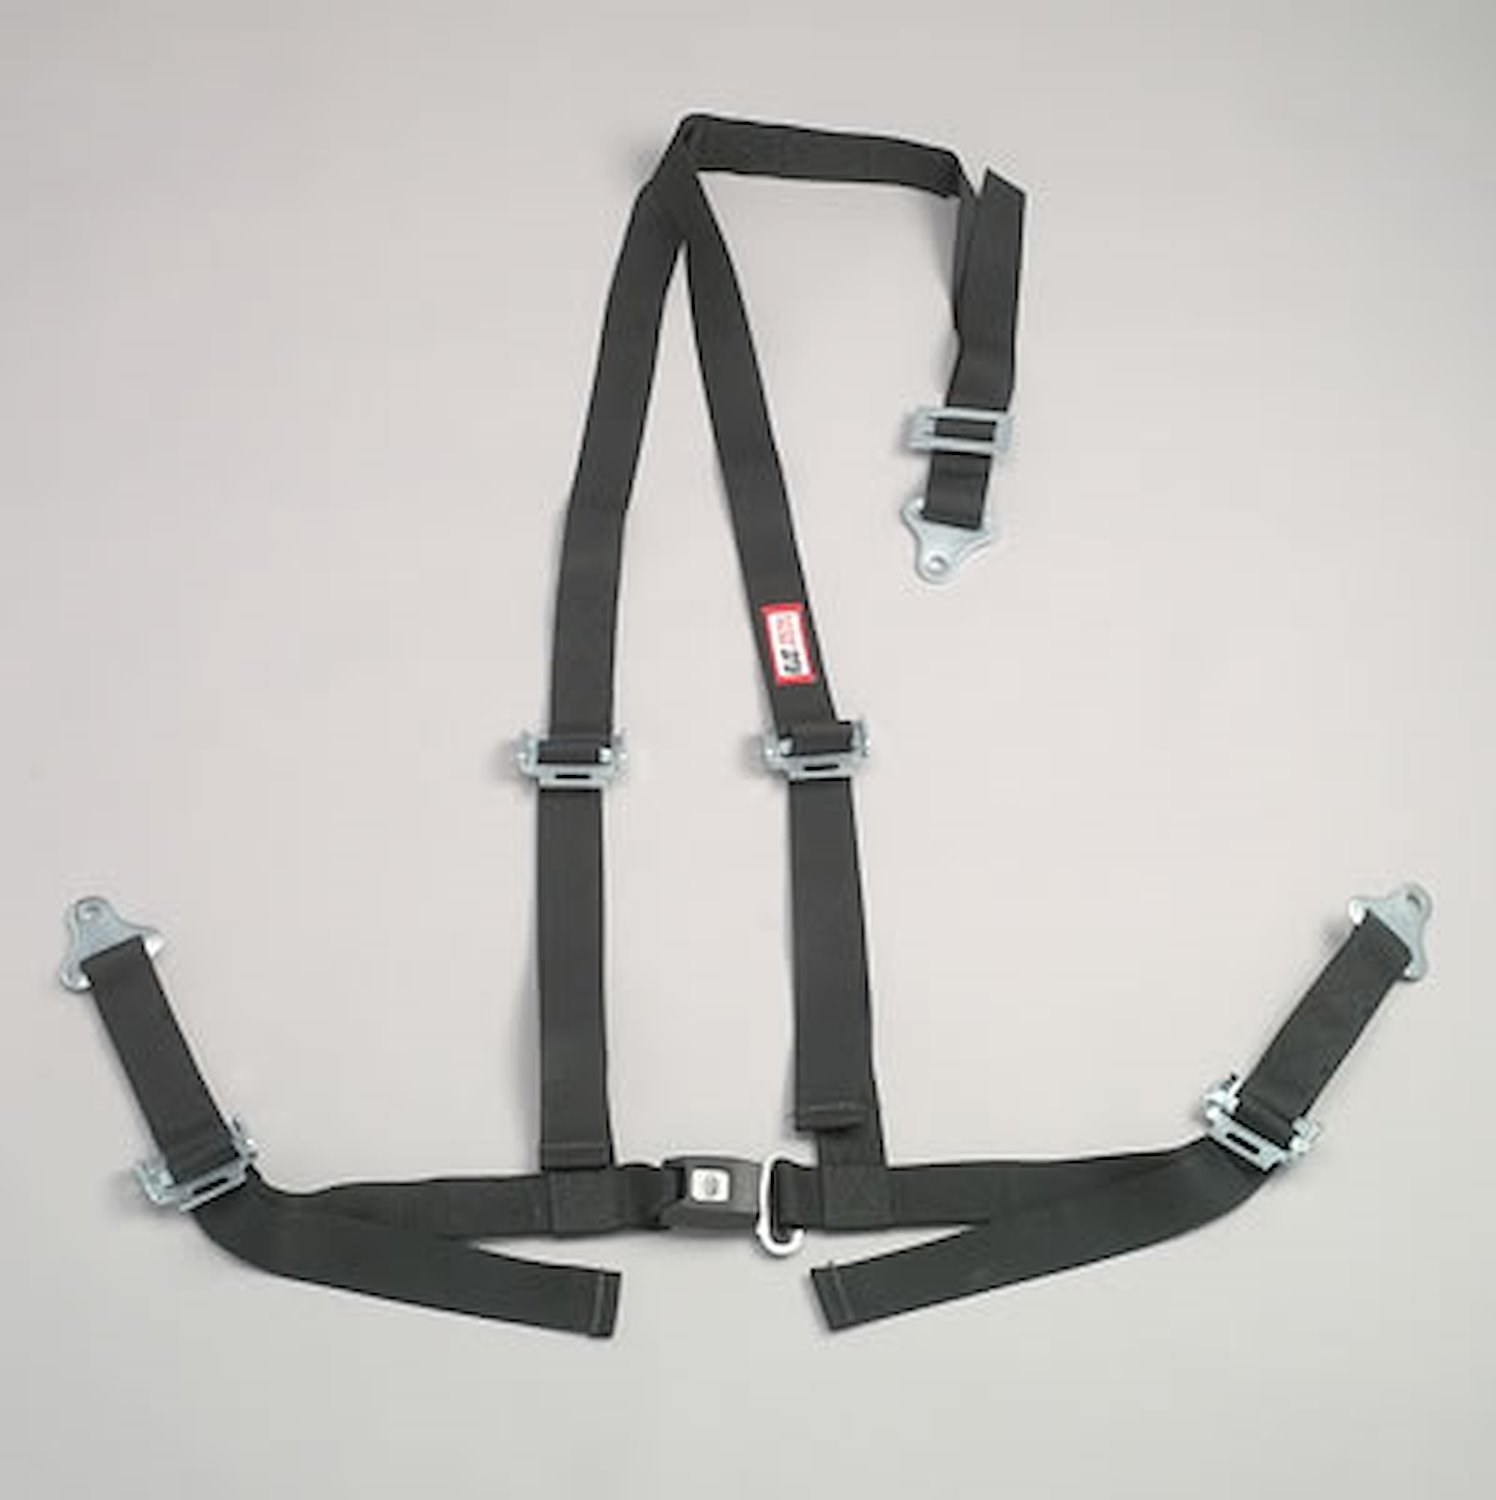 NON-SFI B&T HARNESS 2 PULL UP Lap Belt 2 S. H. Y FLOOR Mount ALL WRAP ENDS w/STERNUM STRAP GRAY